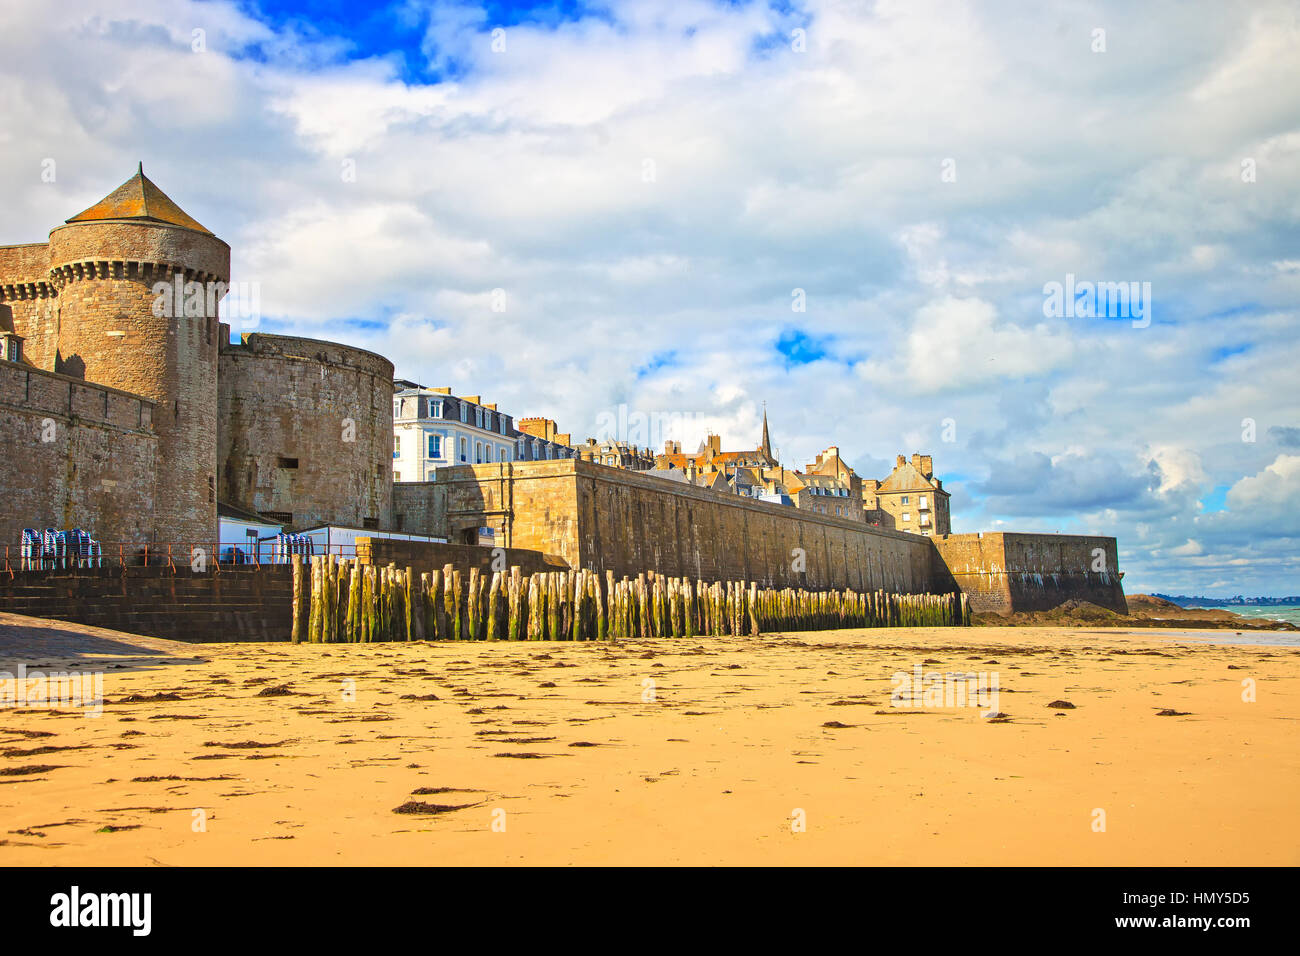 Saint Malo sand beach, city walls and houses. Low tide. Brittany, France, Europe. Stock Photo